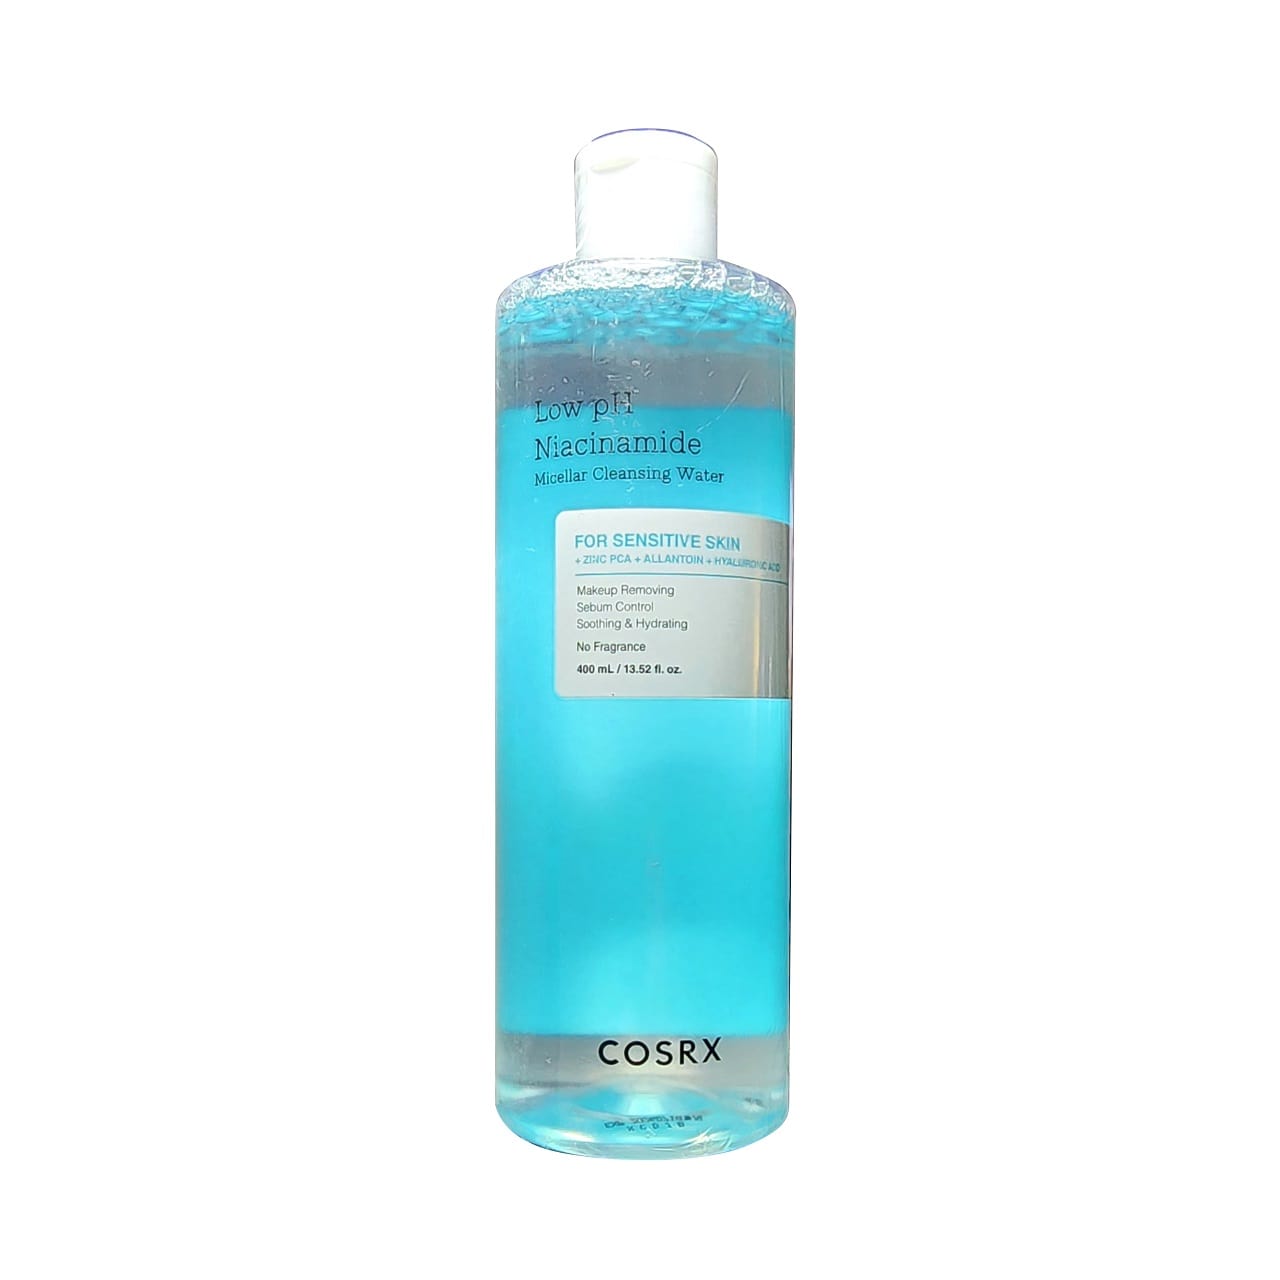 Product label for COSRX Low pH Niacinamide Miceller Cleansing Water (400 mL)